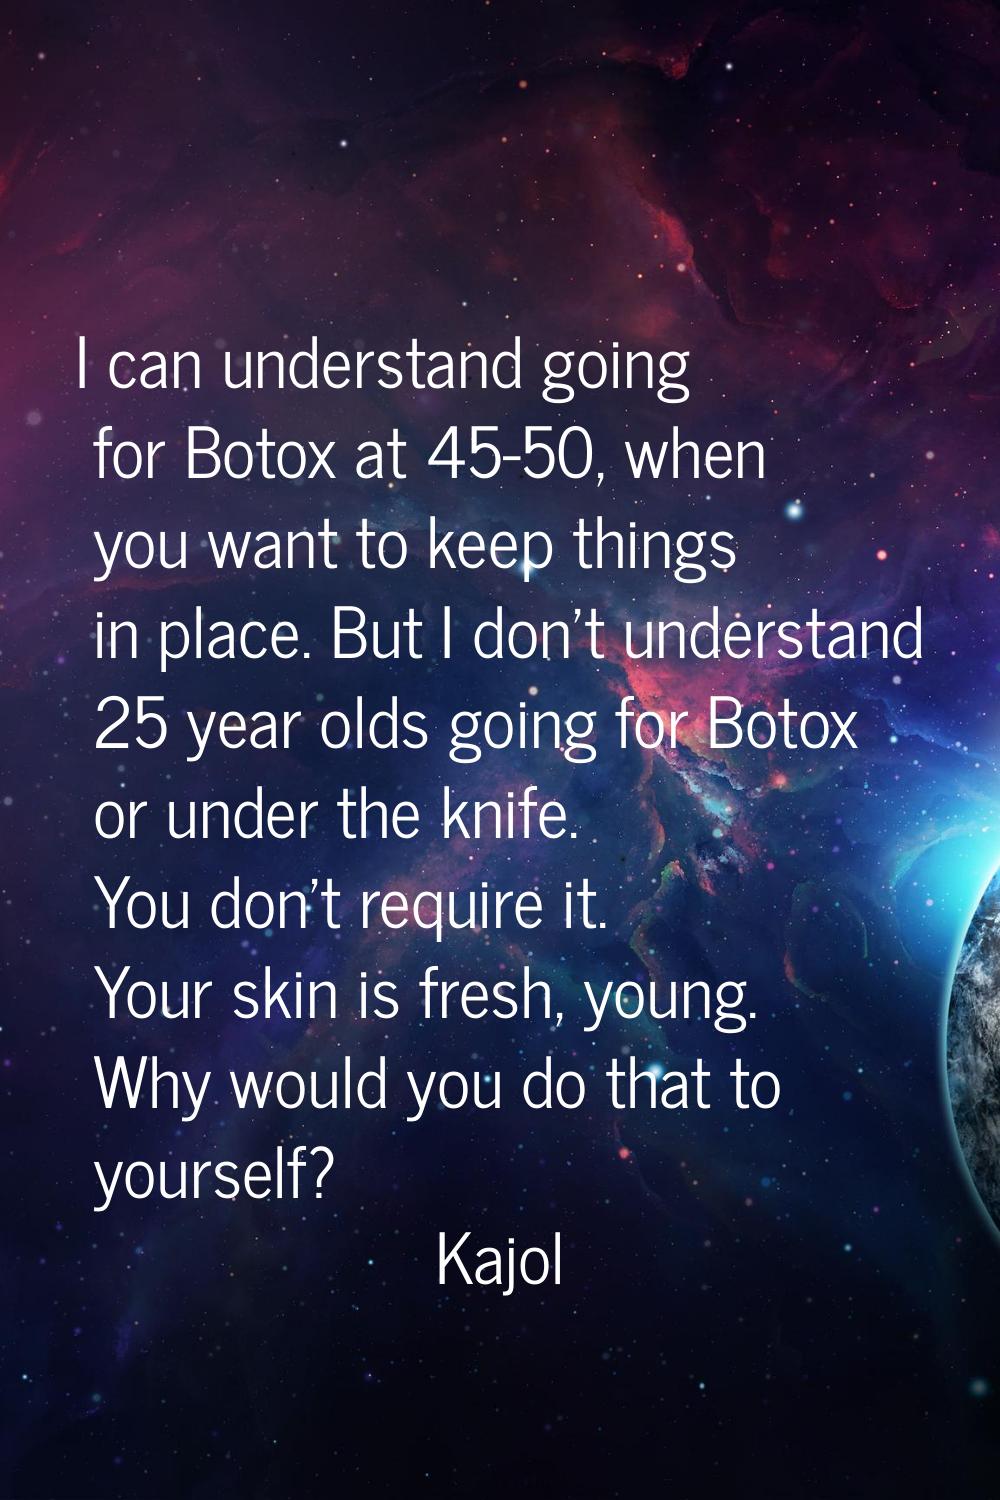 I can understand going for Botox at 45-50, when you want to keep things in place. But I don't under